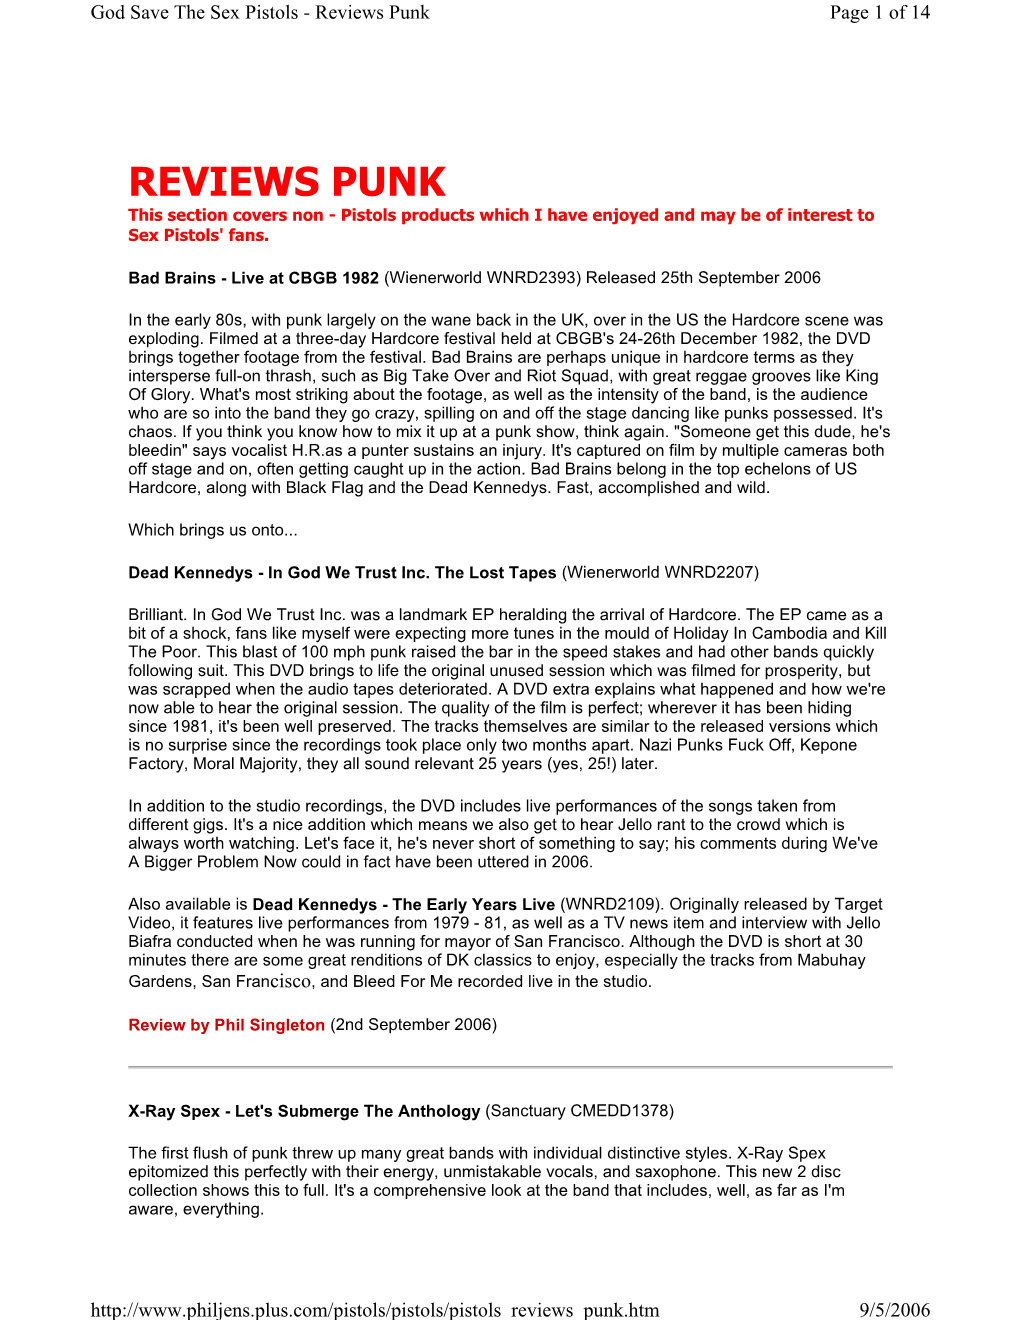 Reviews Punk Page 1 of 14